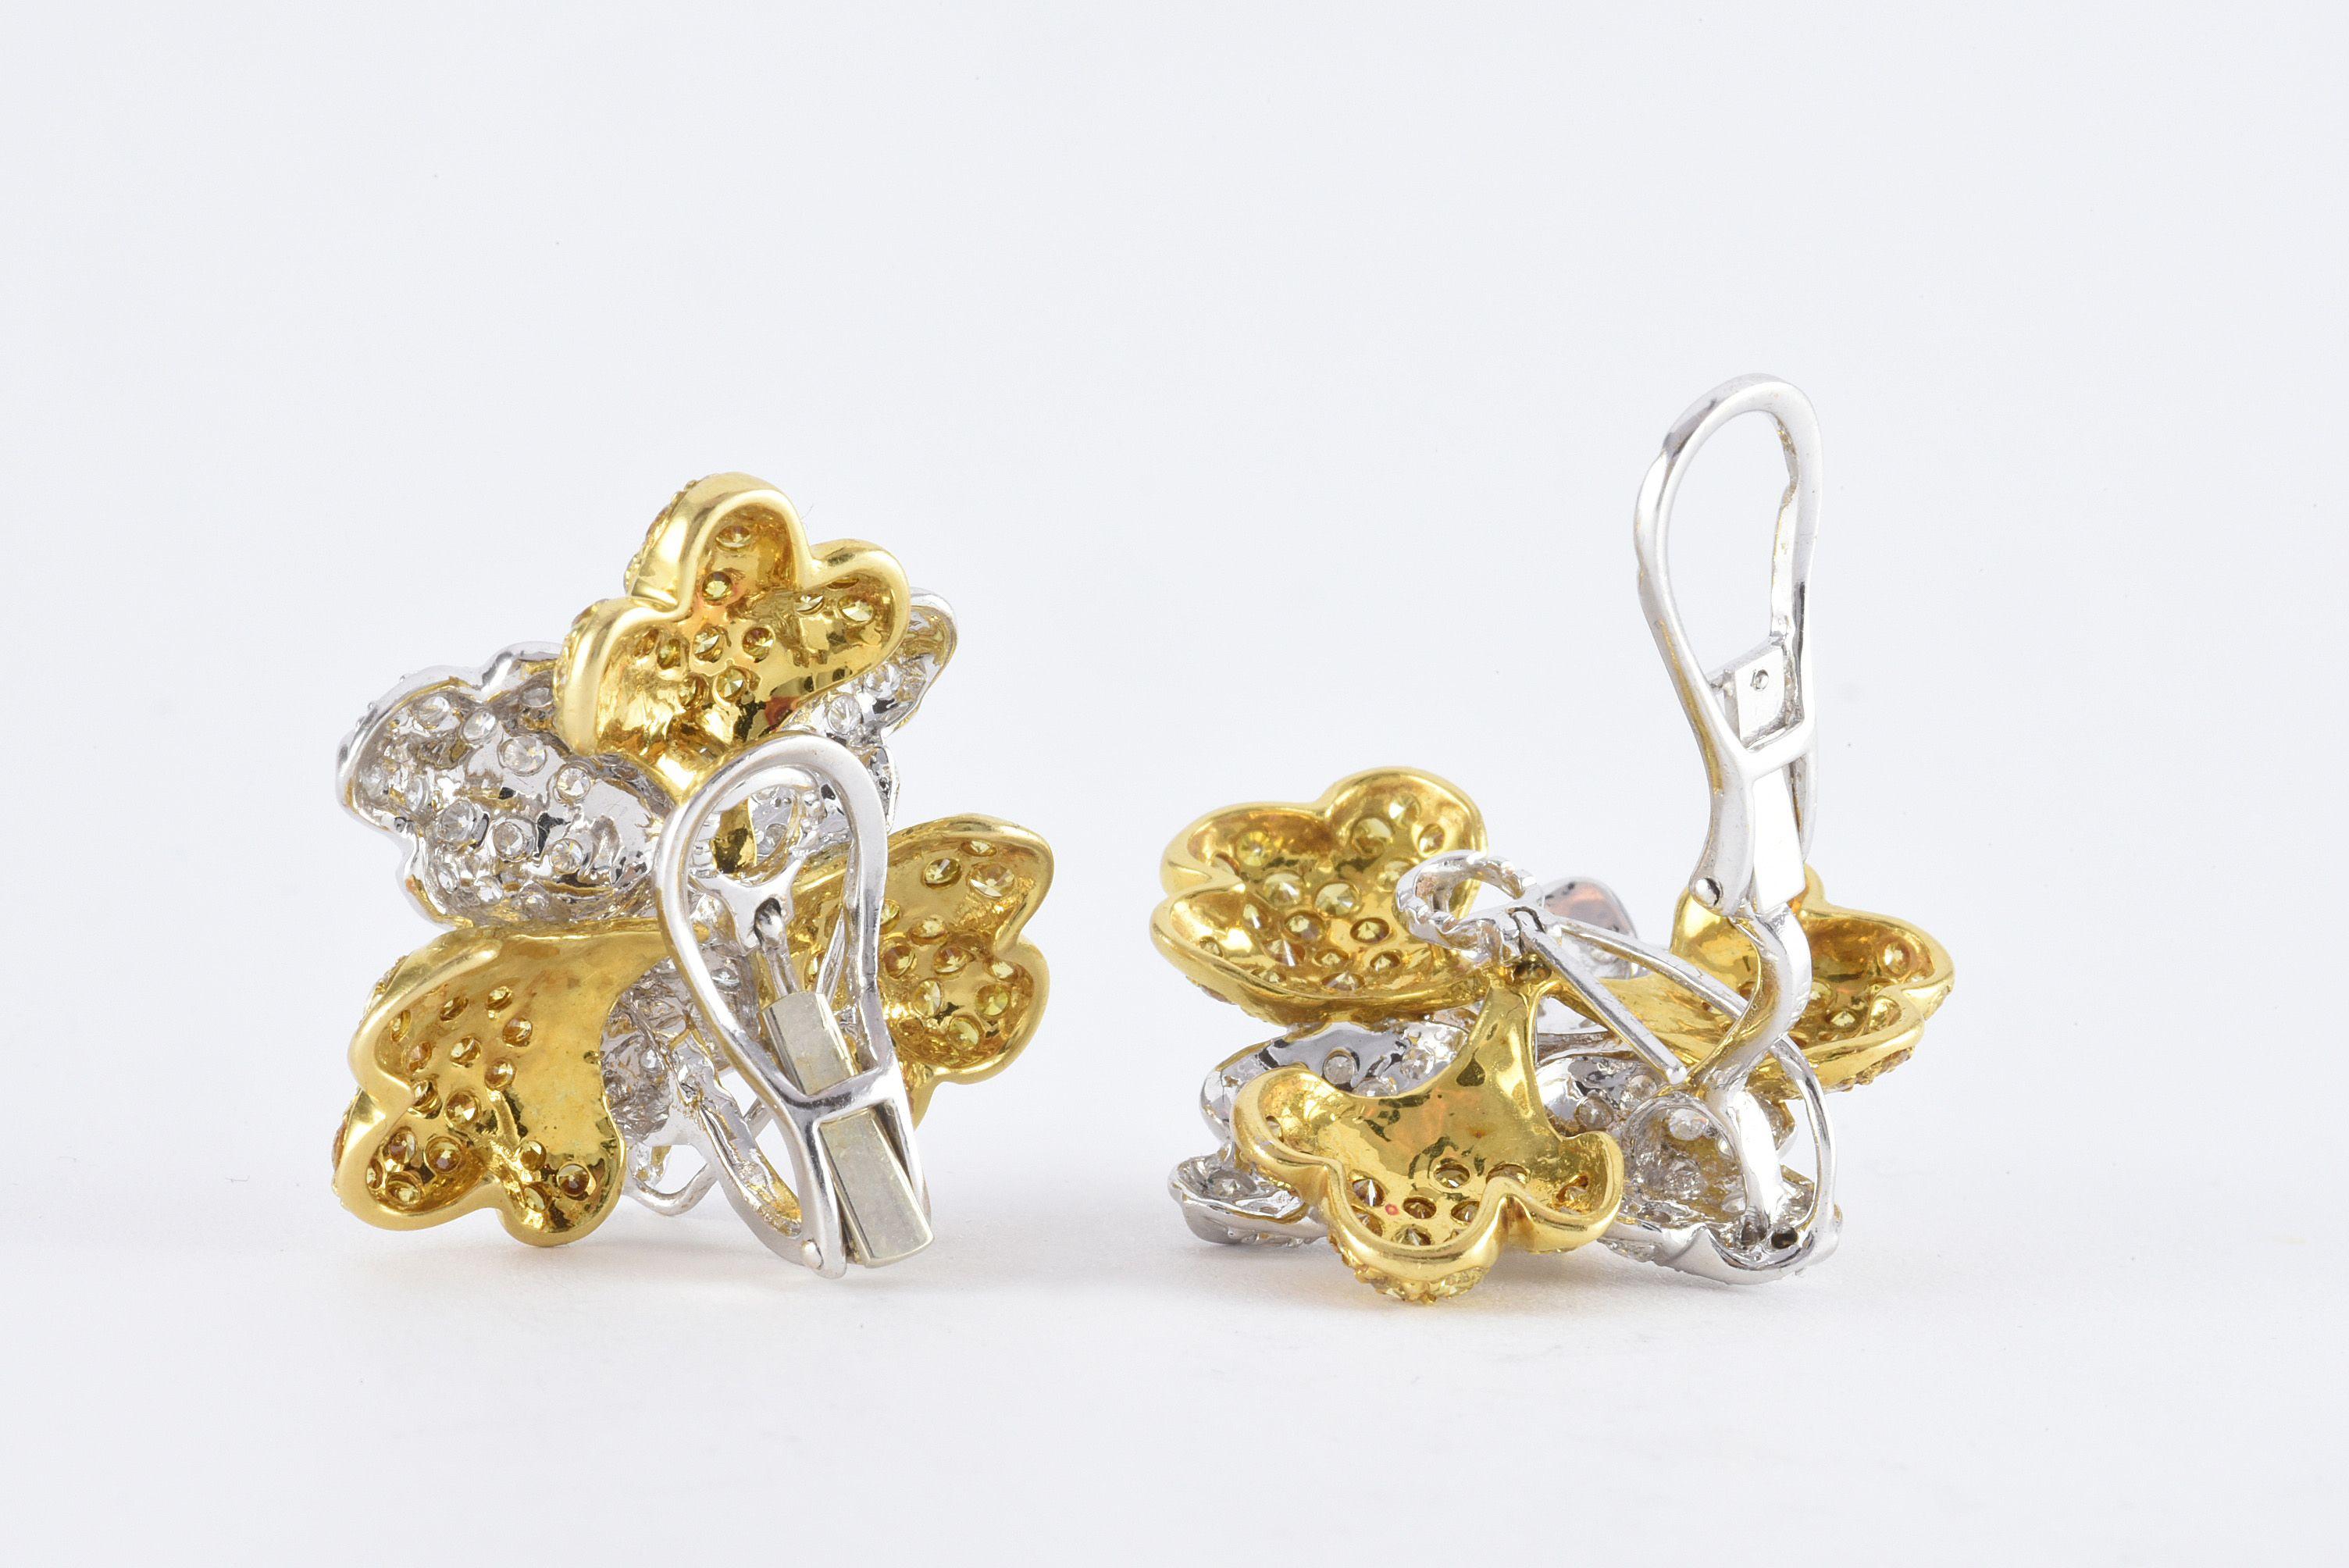 These bold flower ear clips feature fancy vivid yellow diamonds totaling approximately 3.00 carats and round white diamonds totaling approximately 2.00 carats, FG color, VS clarity set in 18kt white and yellow gold and secured with omega backs. For